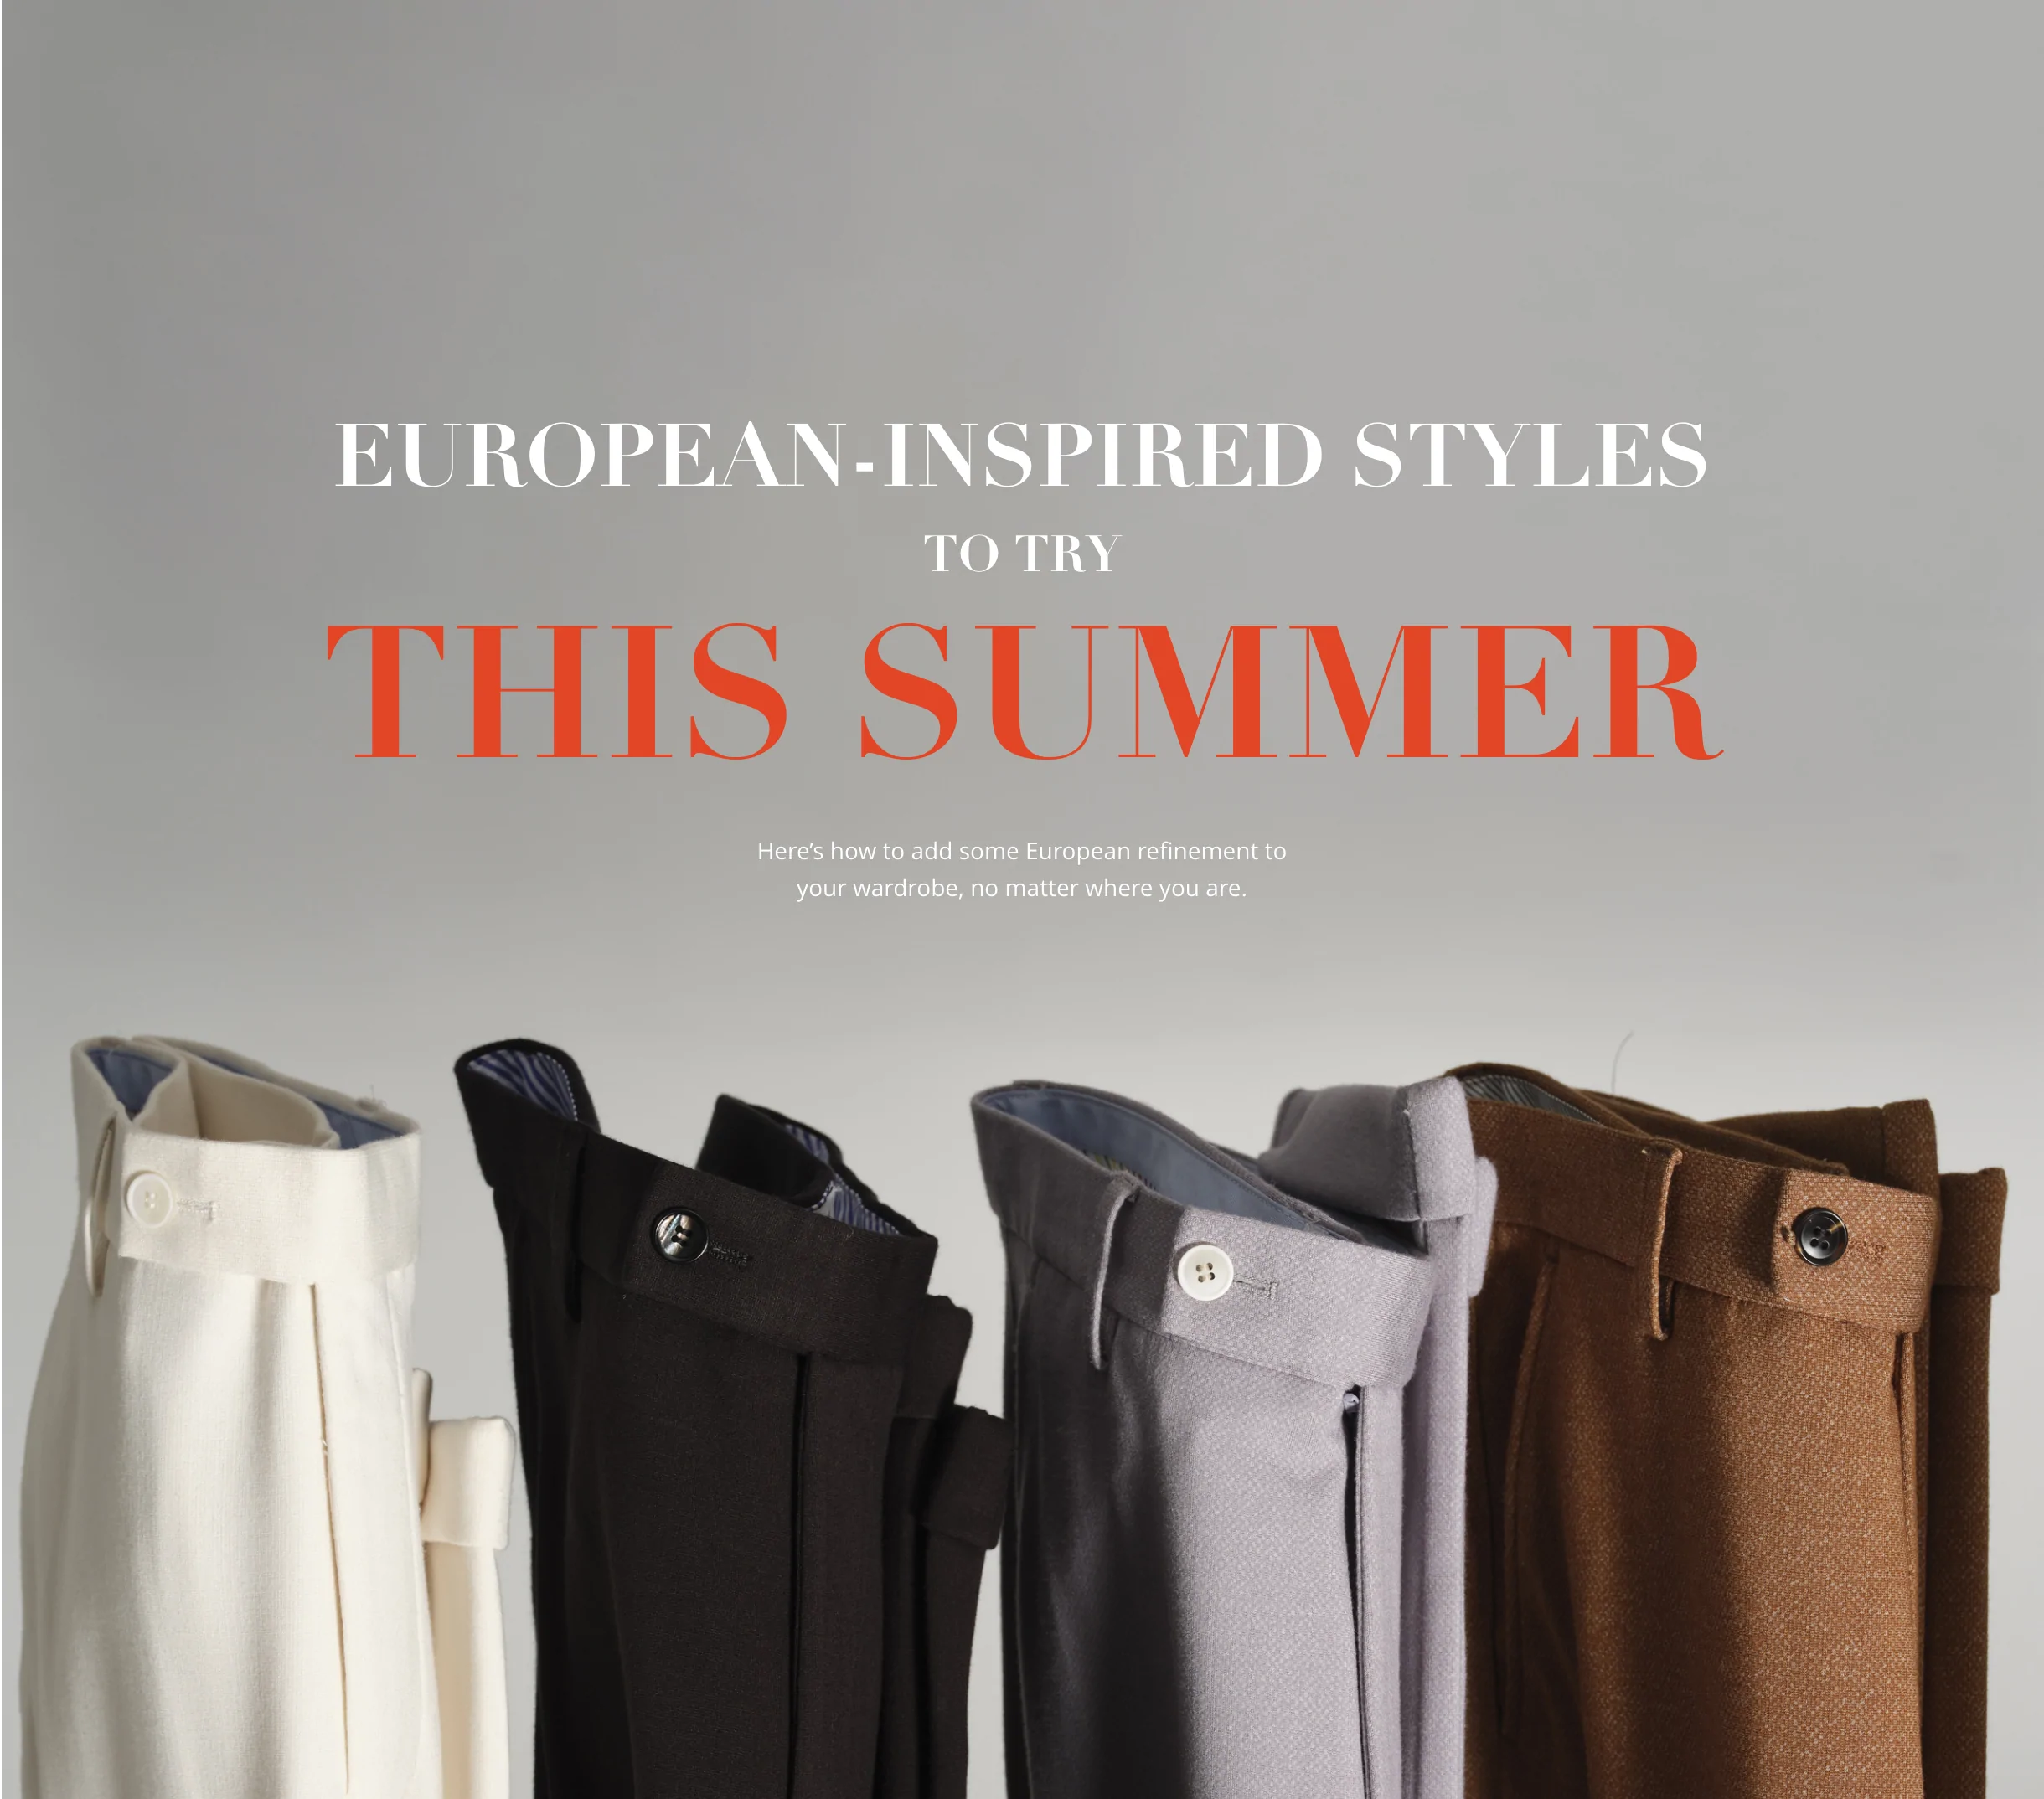 European-Inspired Styles to try This Summer